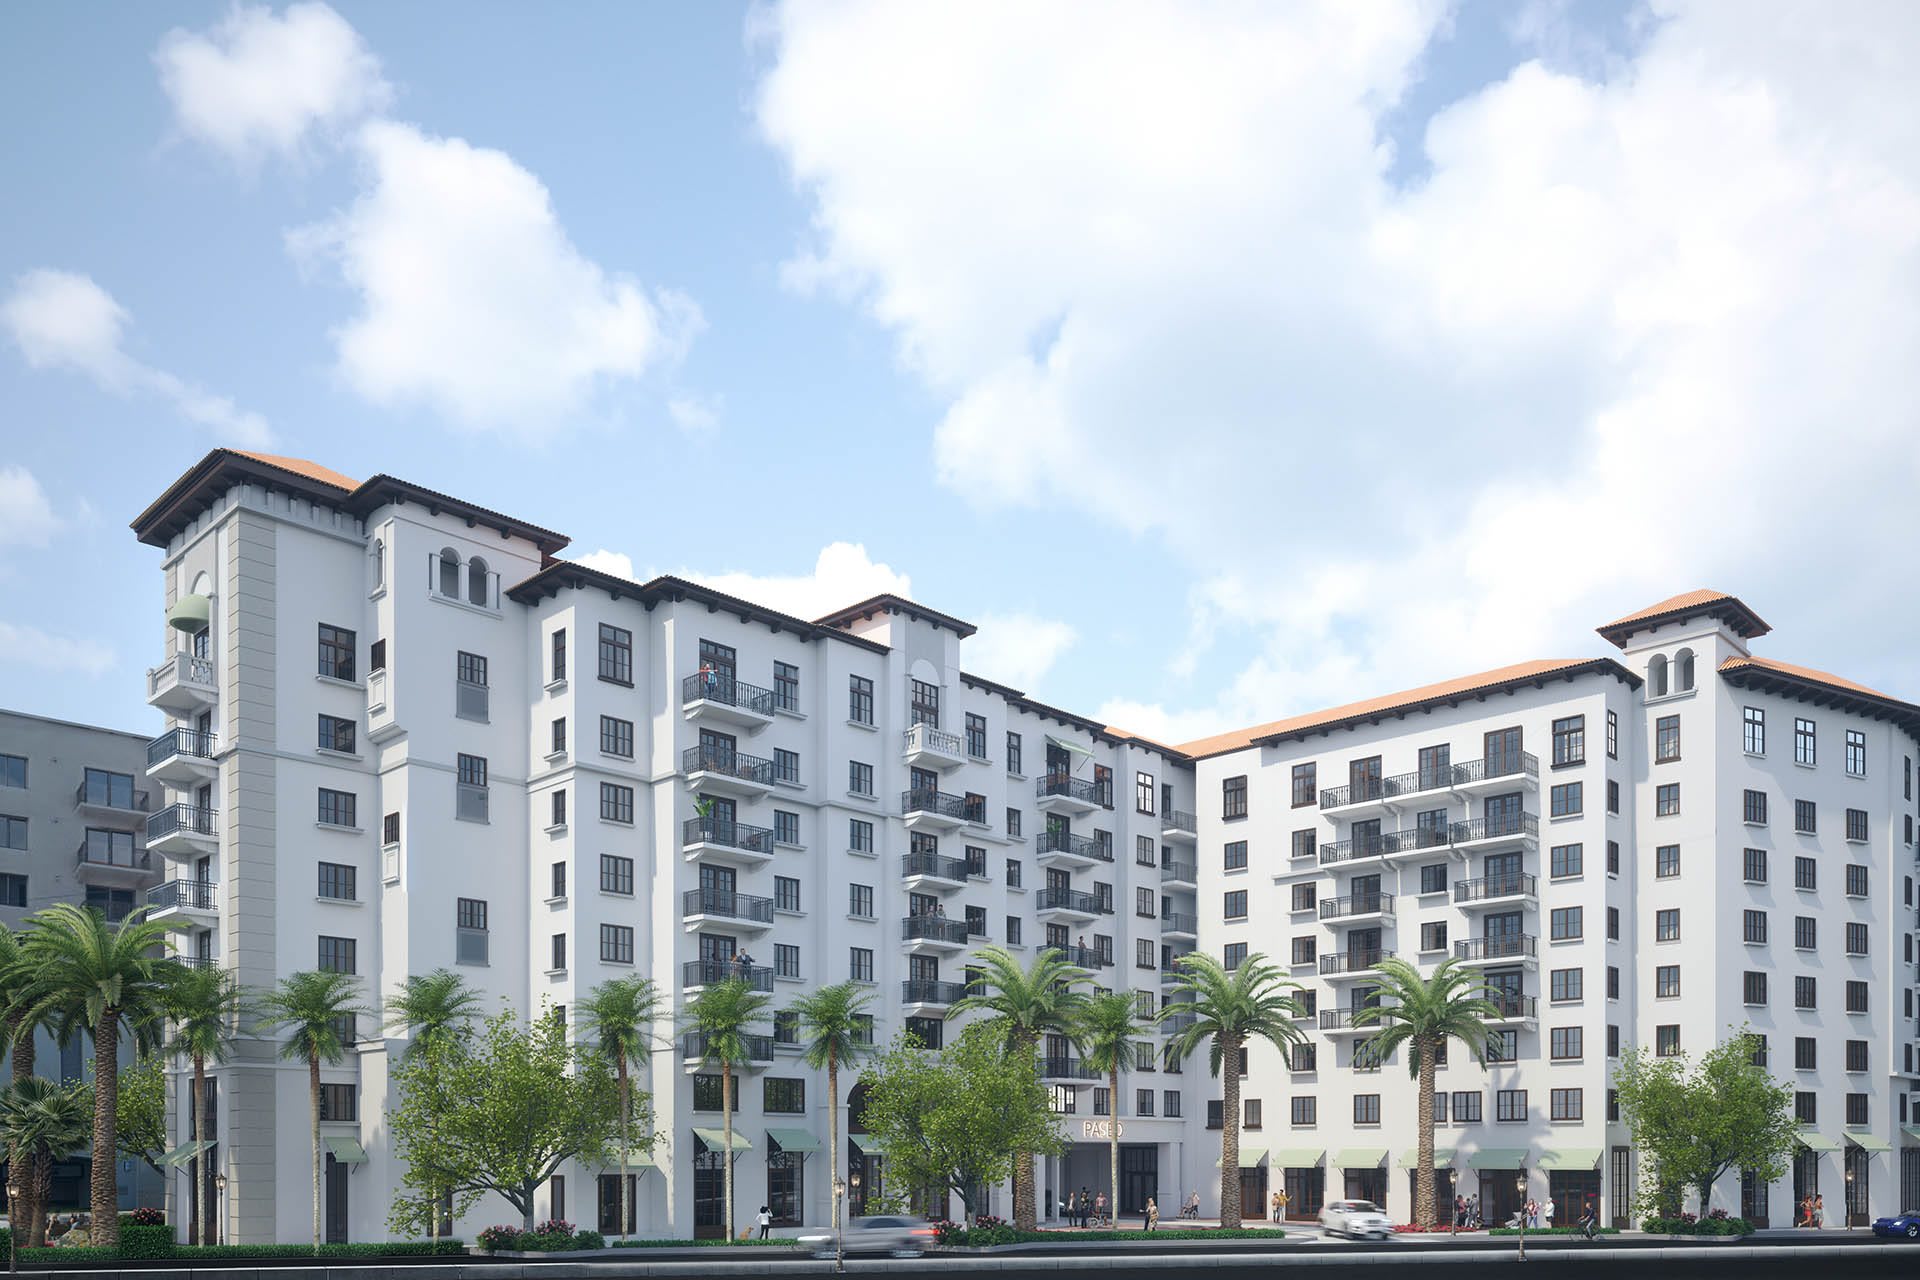 The Watermark at Coral Gables community exterior